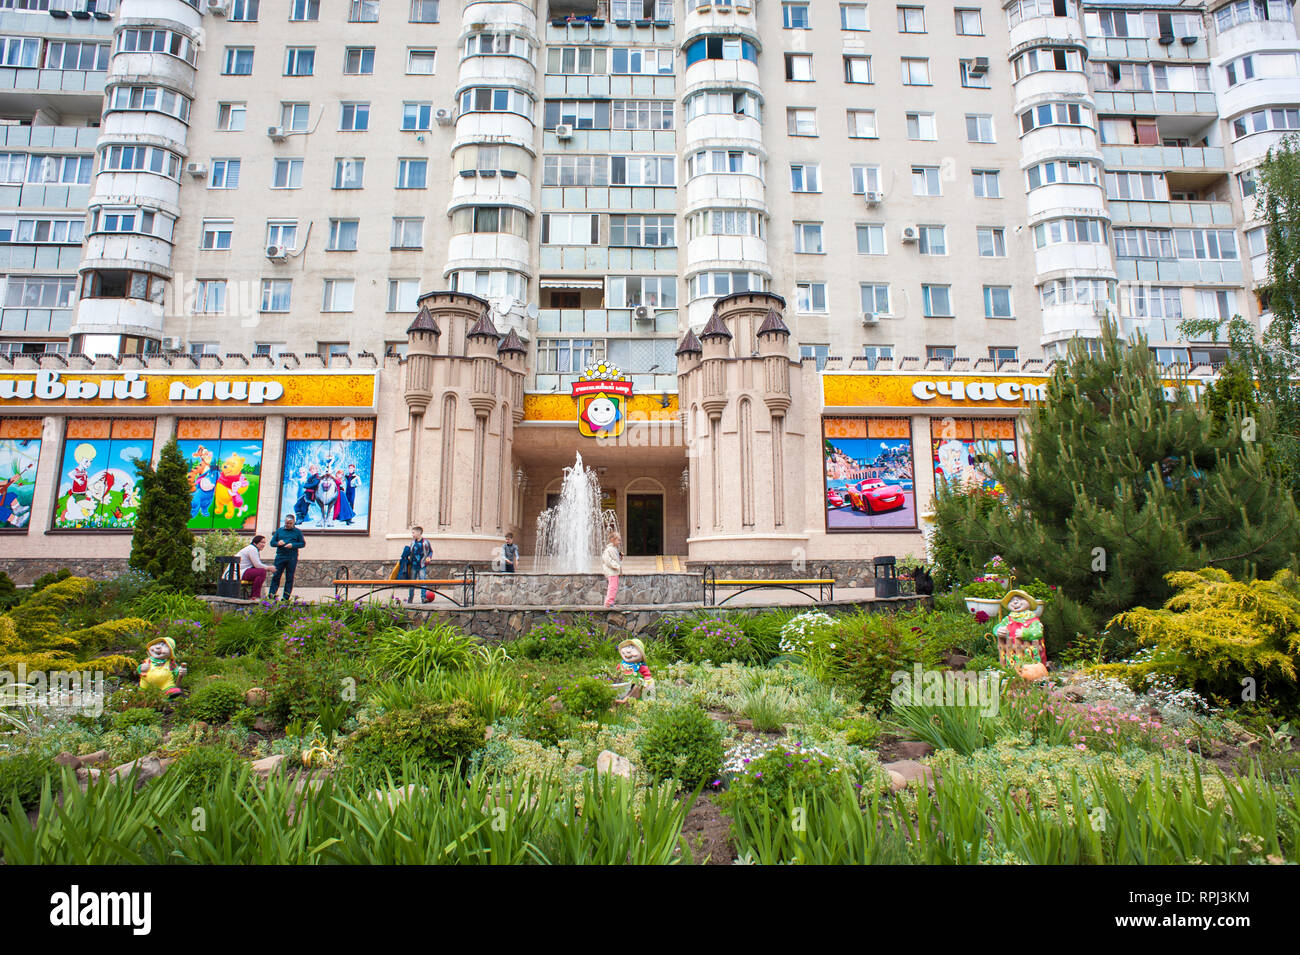 An apartment building in Tiraspol, the capital city of Transnistria, a break away state from the Republic of Moldova. Stock Photo